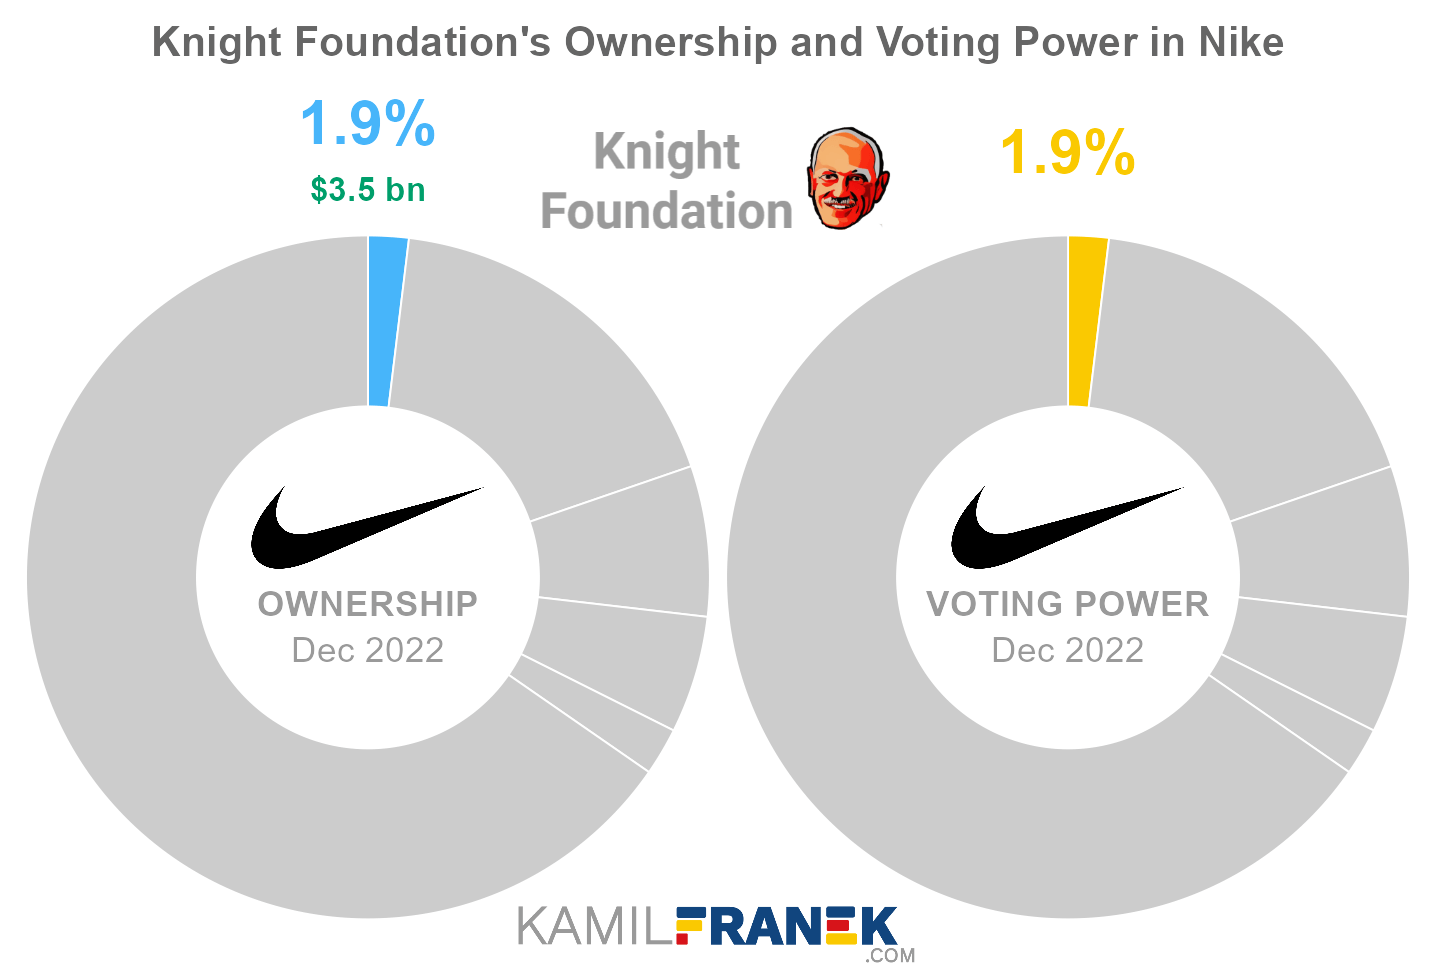 Knight Foundation's share ownership and voting power in Nike (chart)